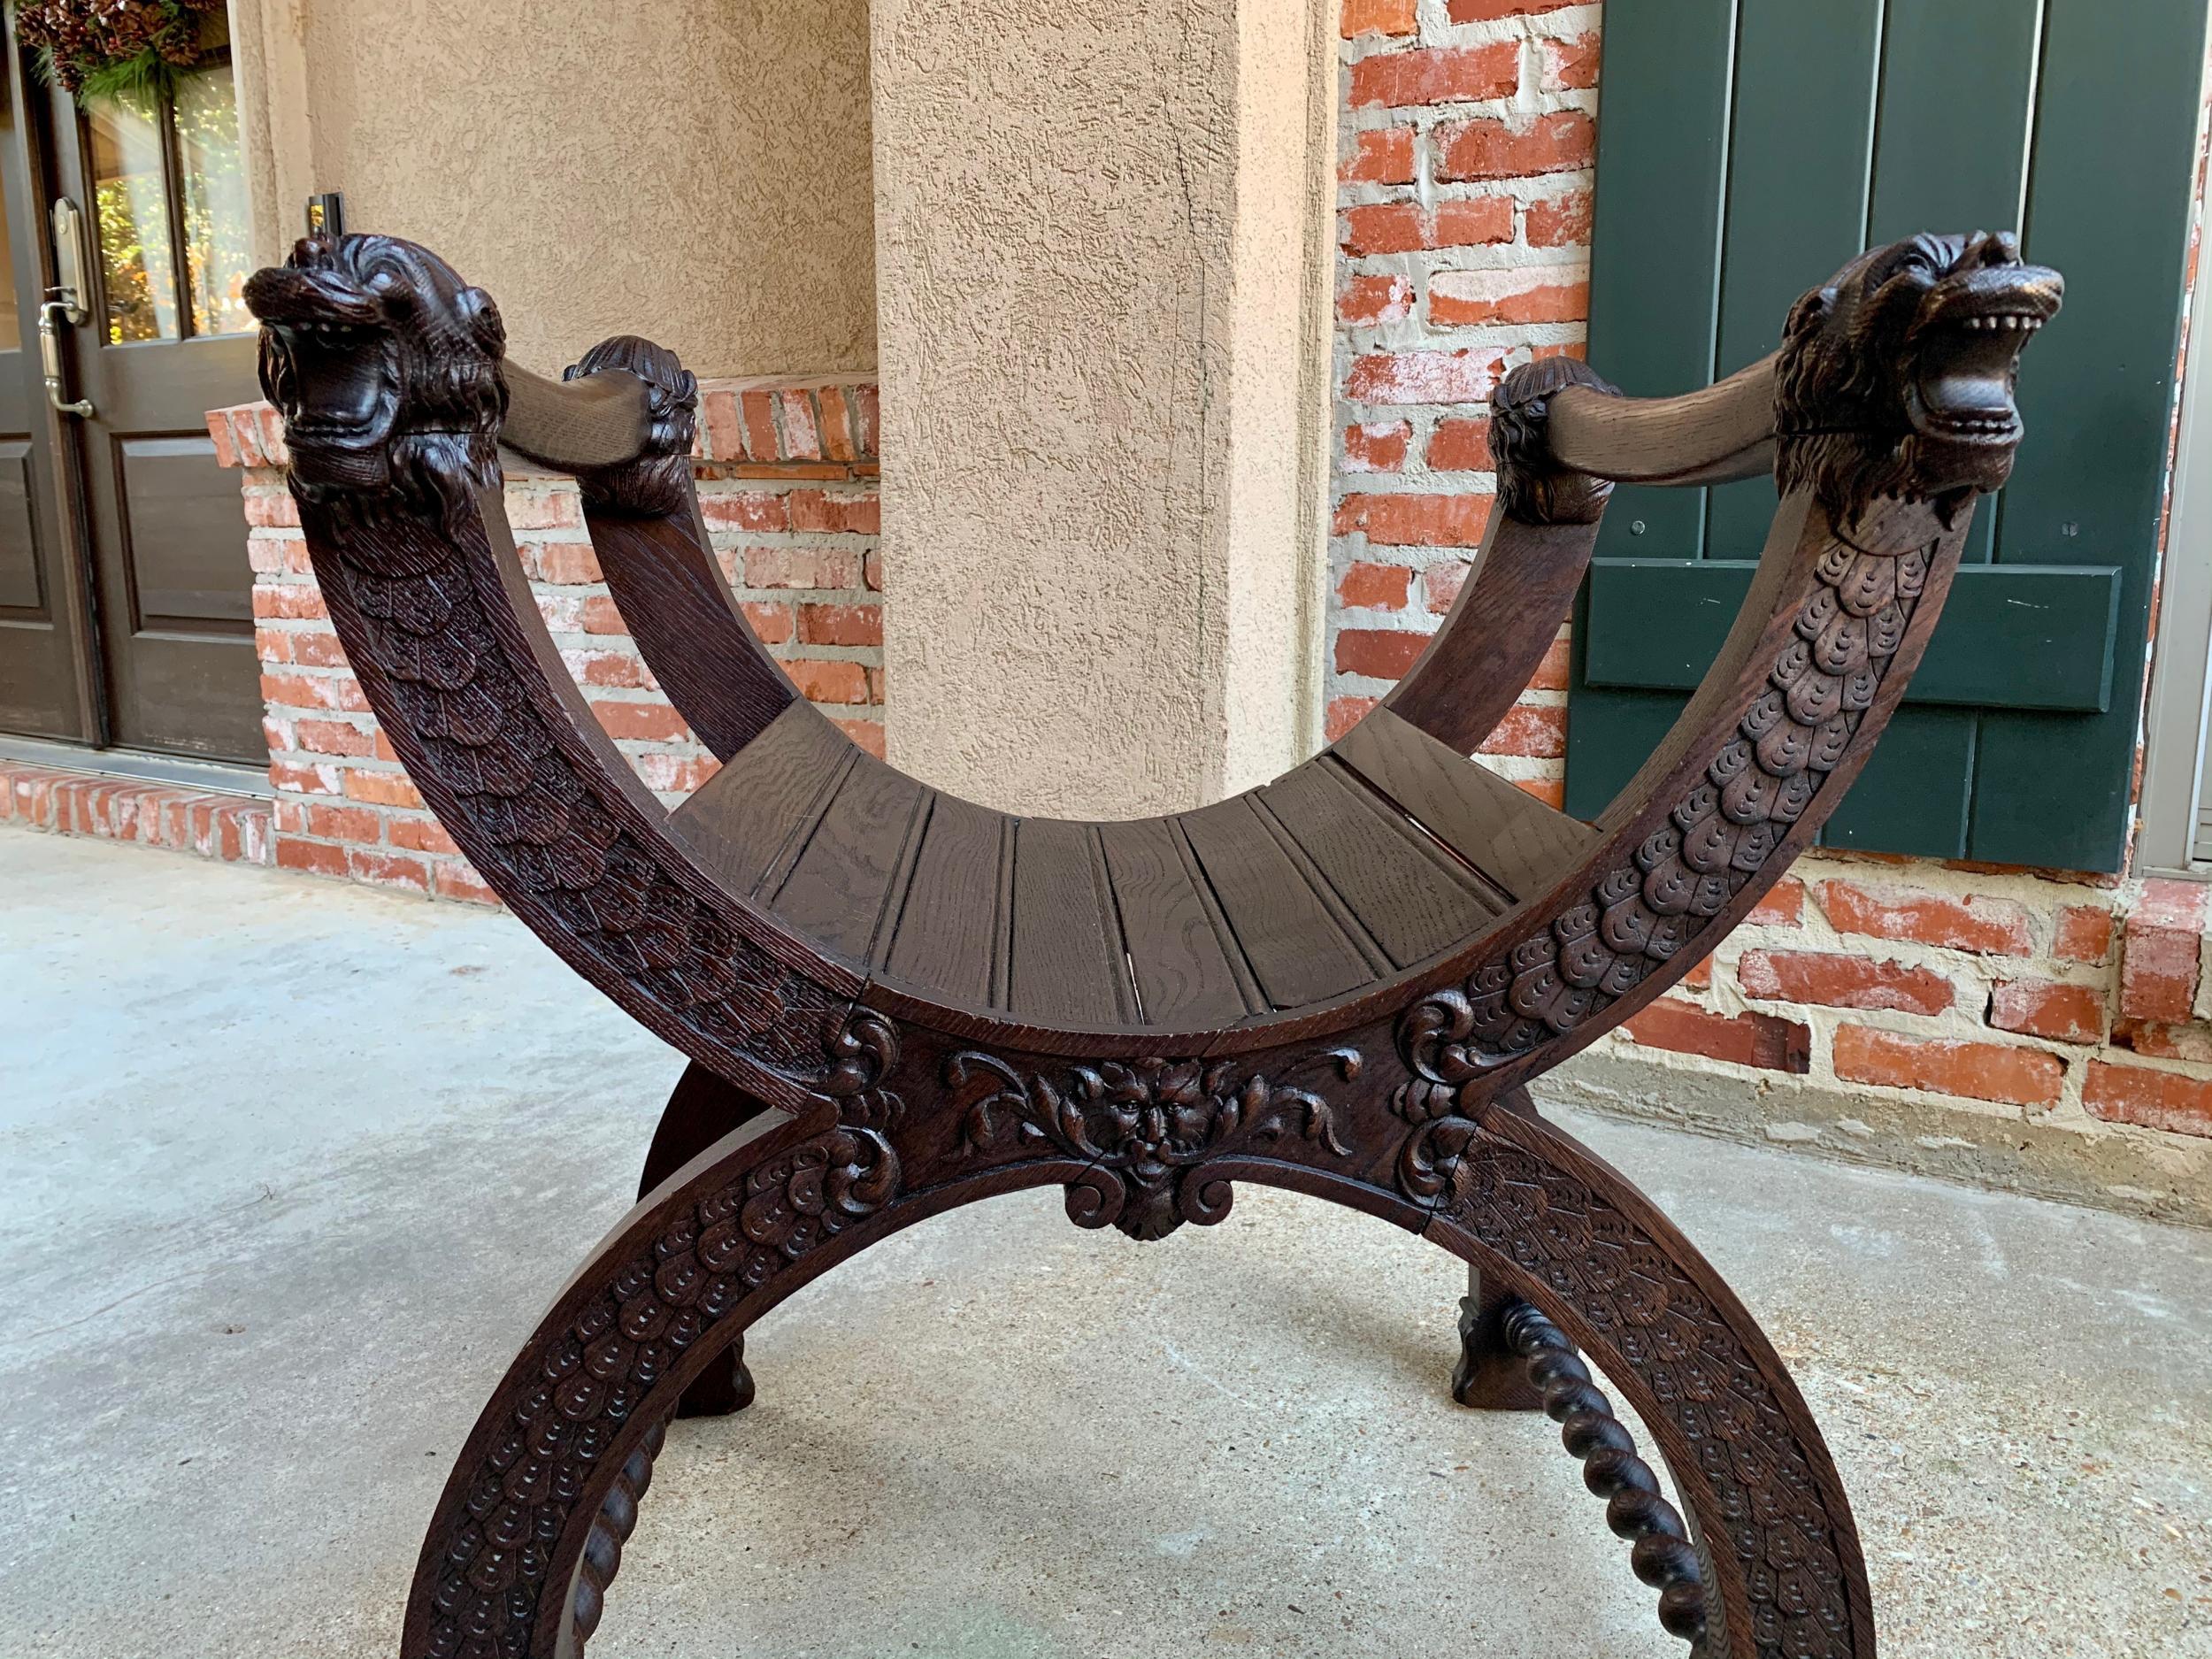 antique chair with lion head arms